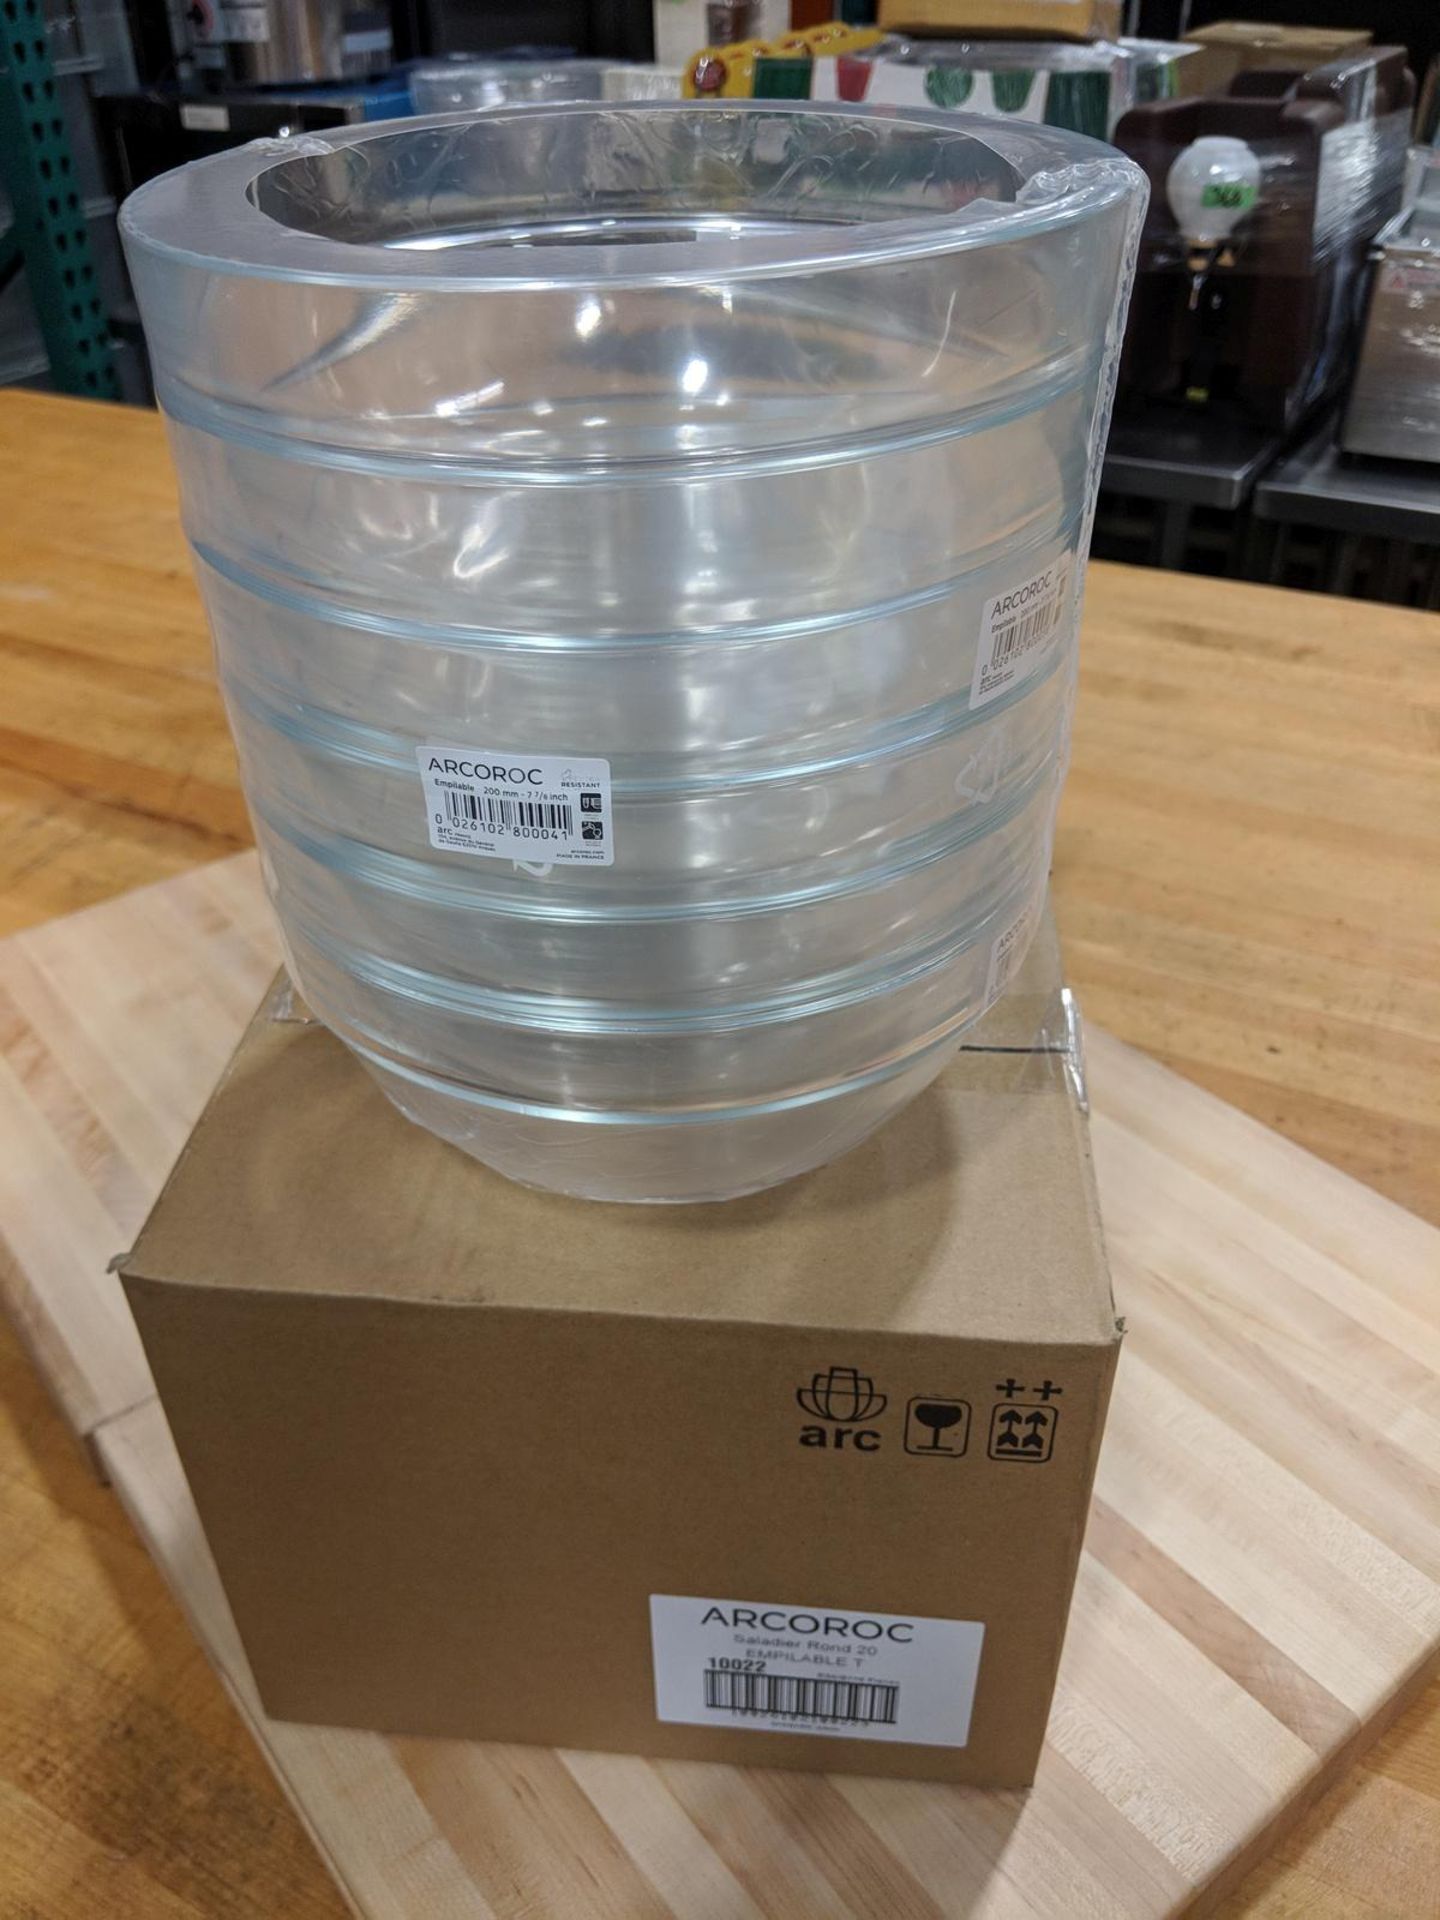 8" Clear Glass Stacking Salad Bowls, 64oz/1.9L - Lot of 12 (2 Cases), Arcoroc 10022 - Image 3 of 5